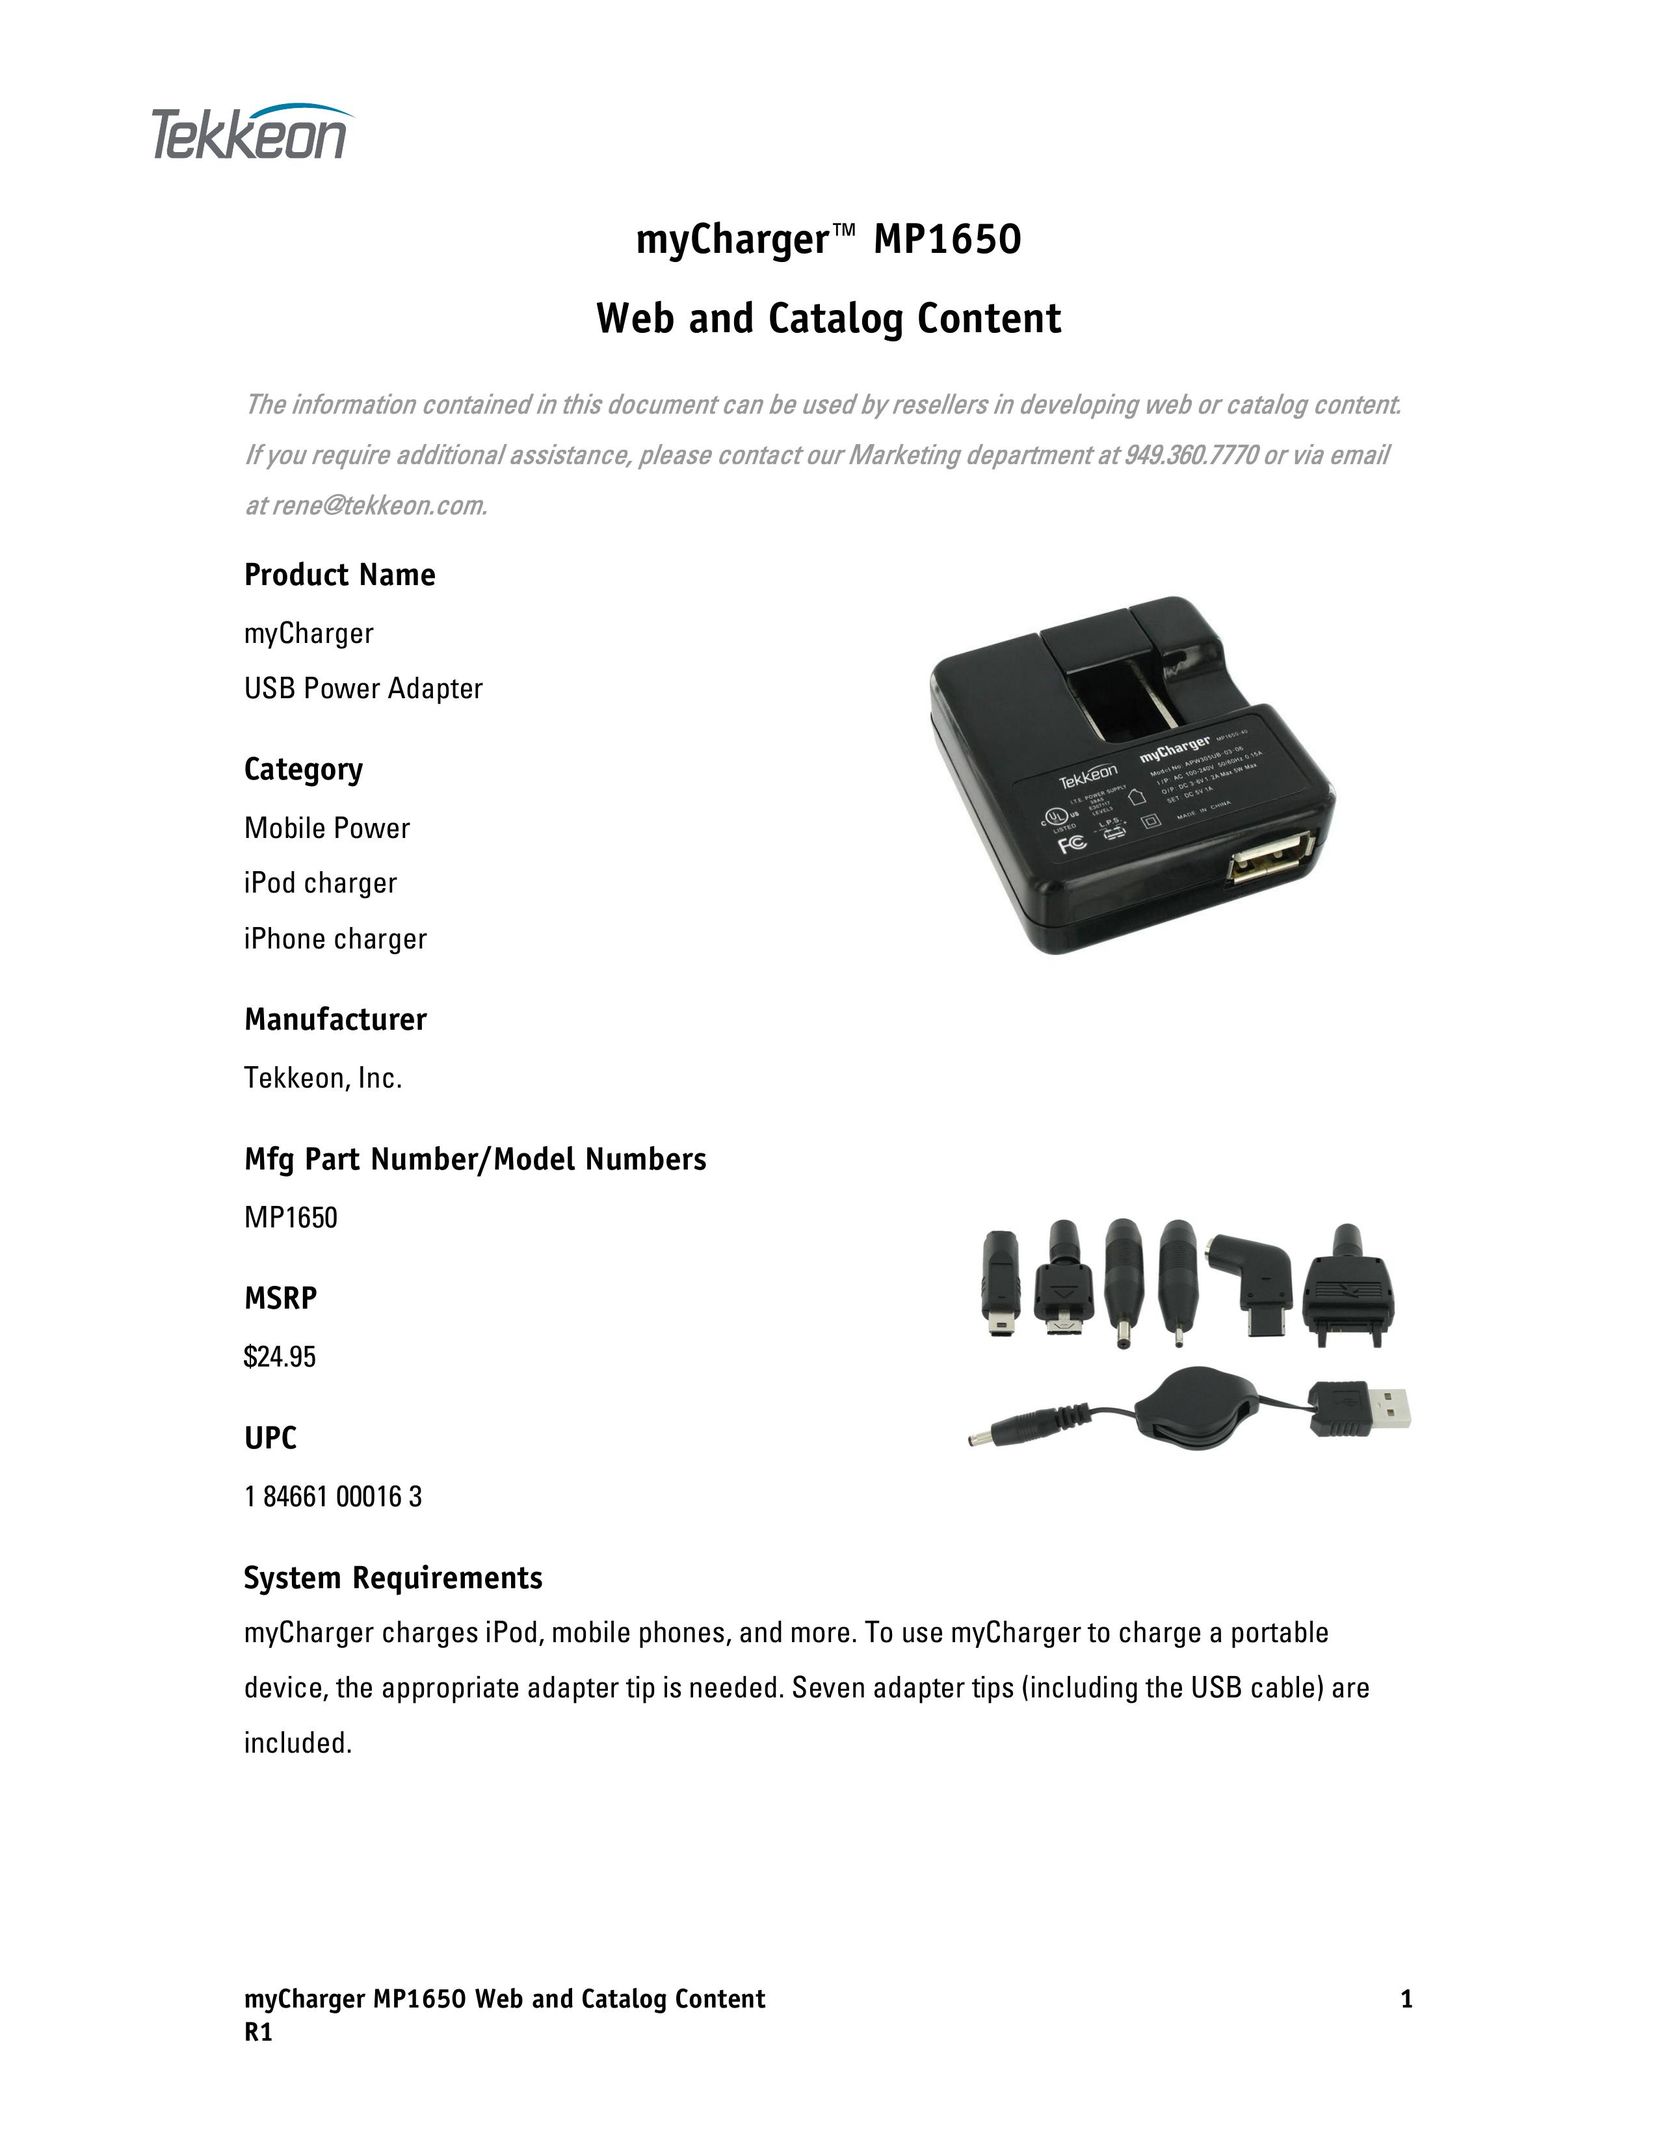 Tekkeon HX6711 Battery Charger User Manual